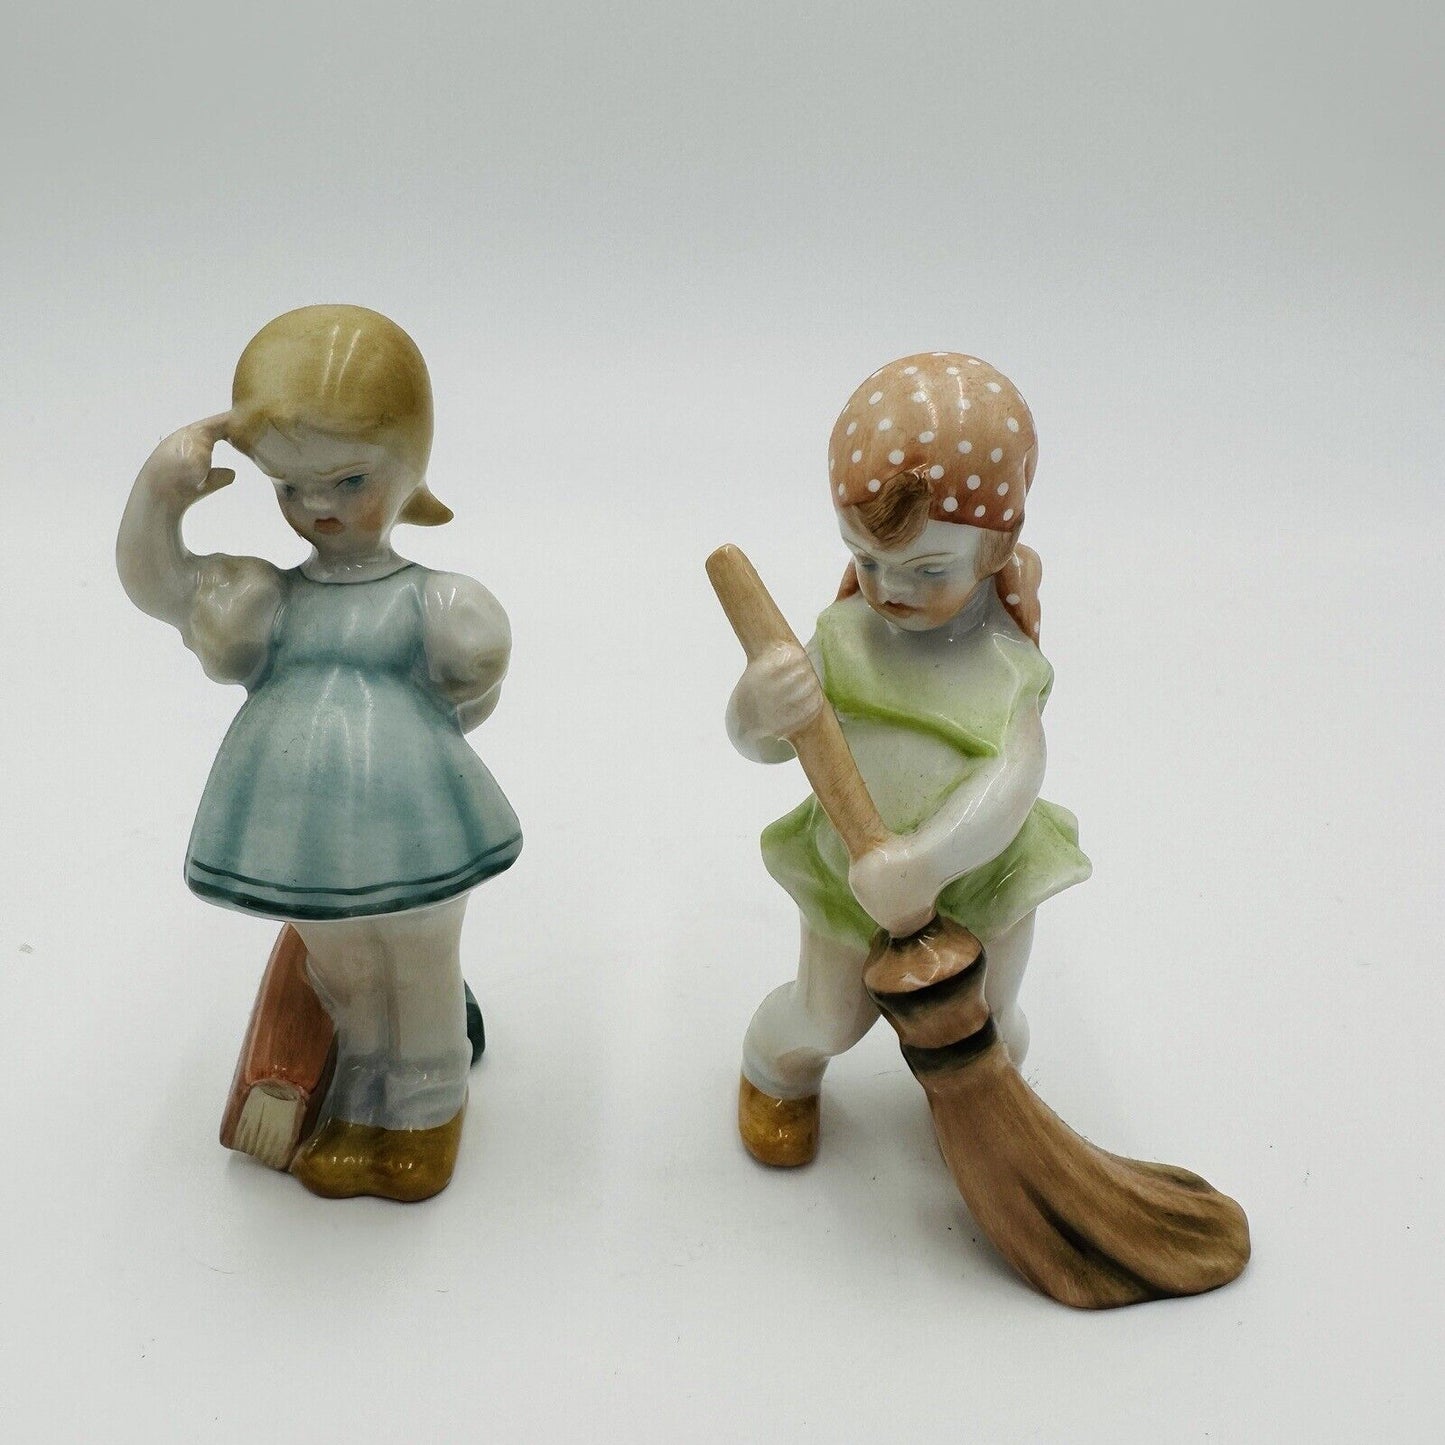 Herend Porcelain Girls Cleaning Broom & School Book Figurines Small 4 inch Decor